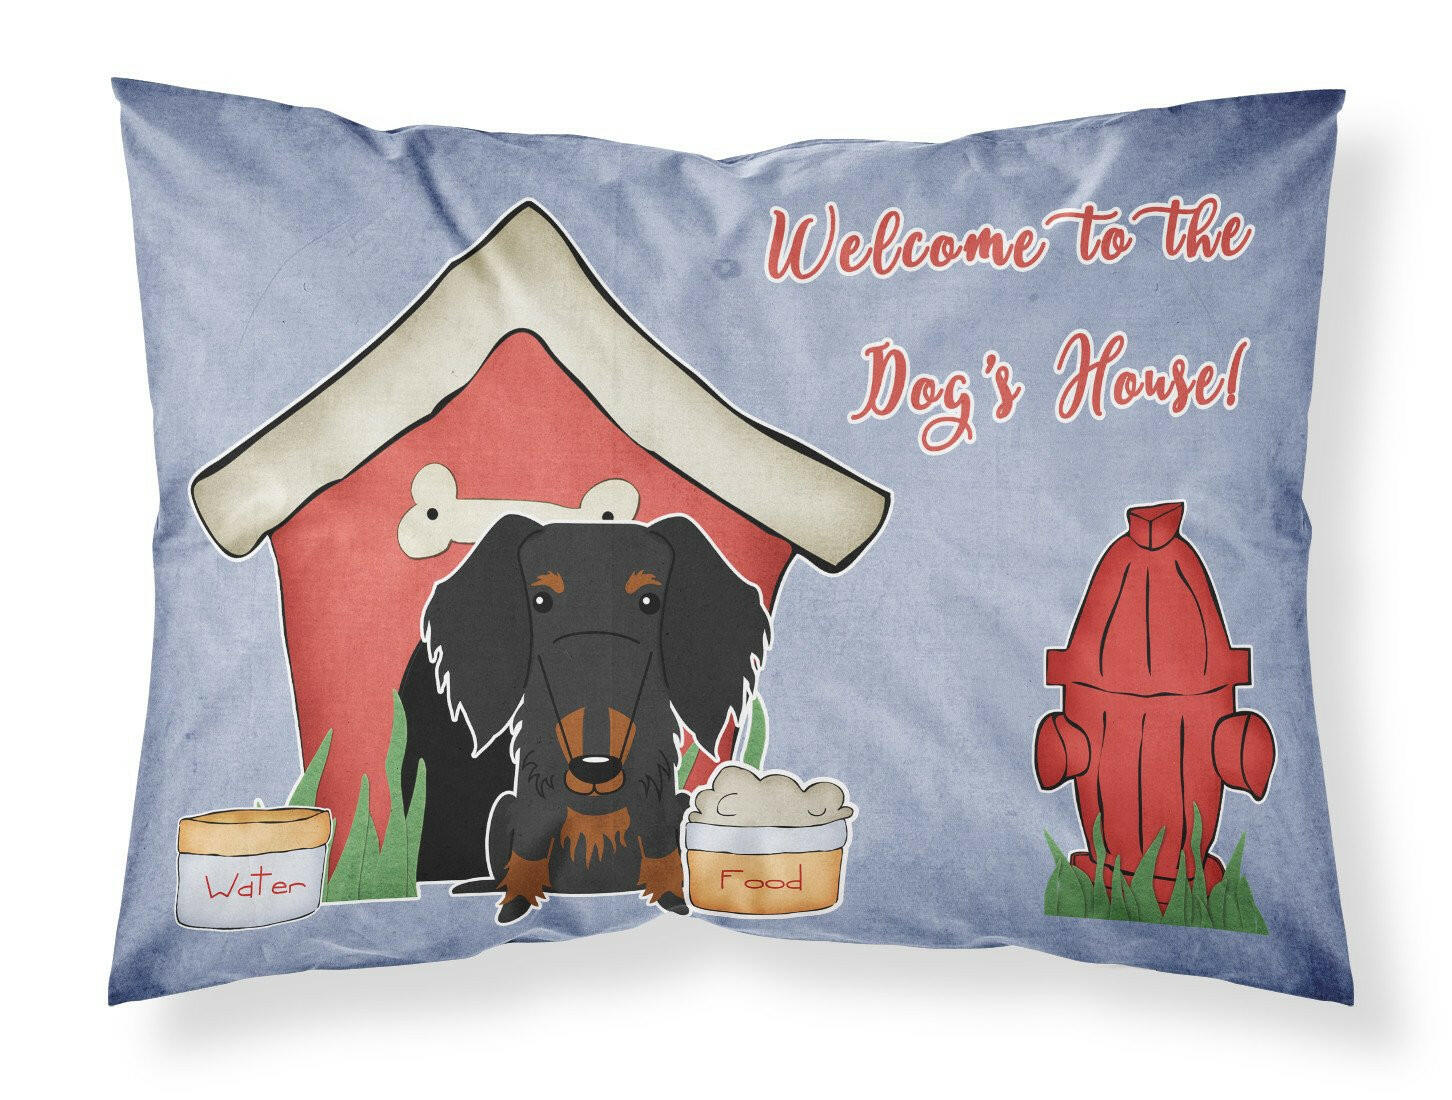 Dog House Collection Wire Haired Dachshund Black Tan Fabric Standard Pillowcase BB2881PILLOWCASE by Caroline's Treasures